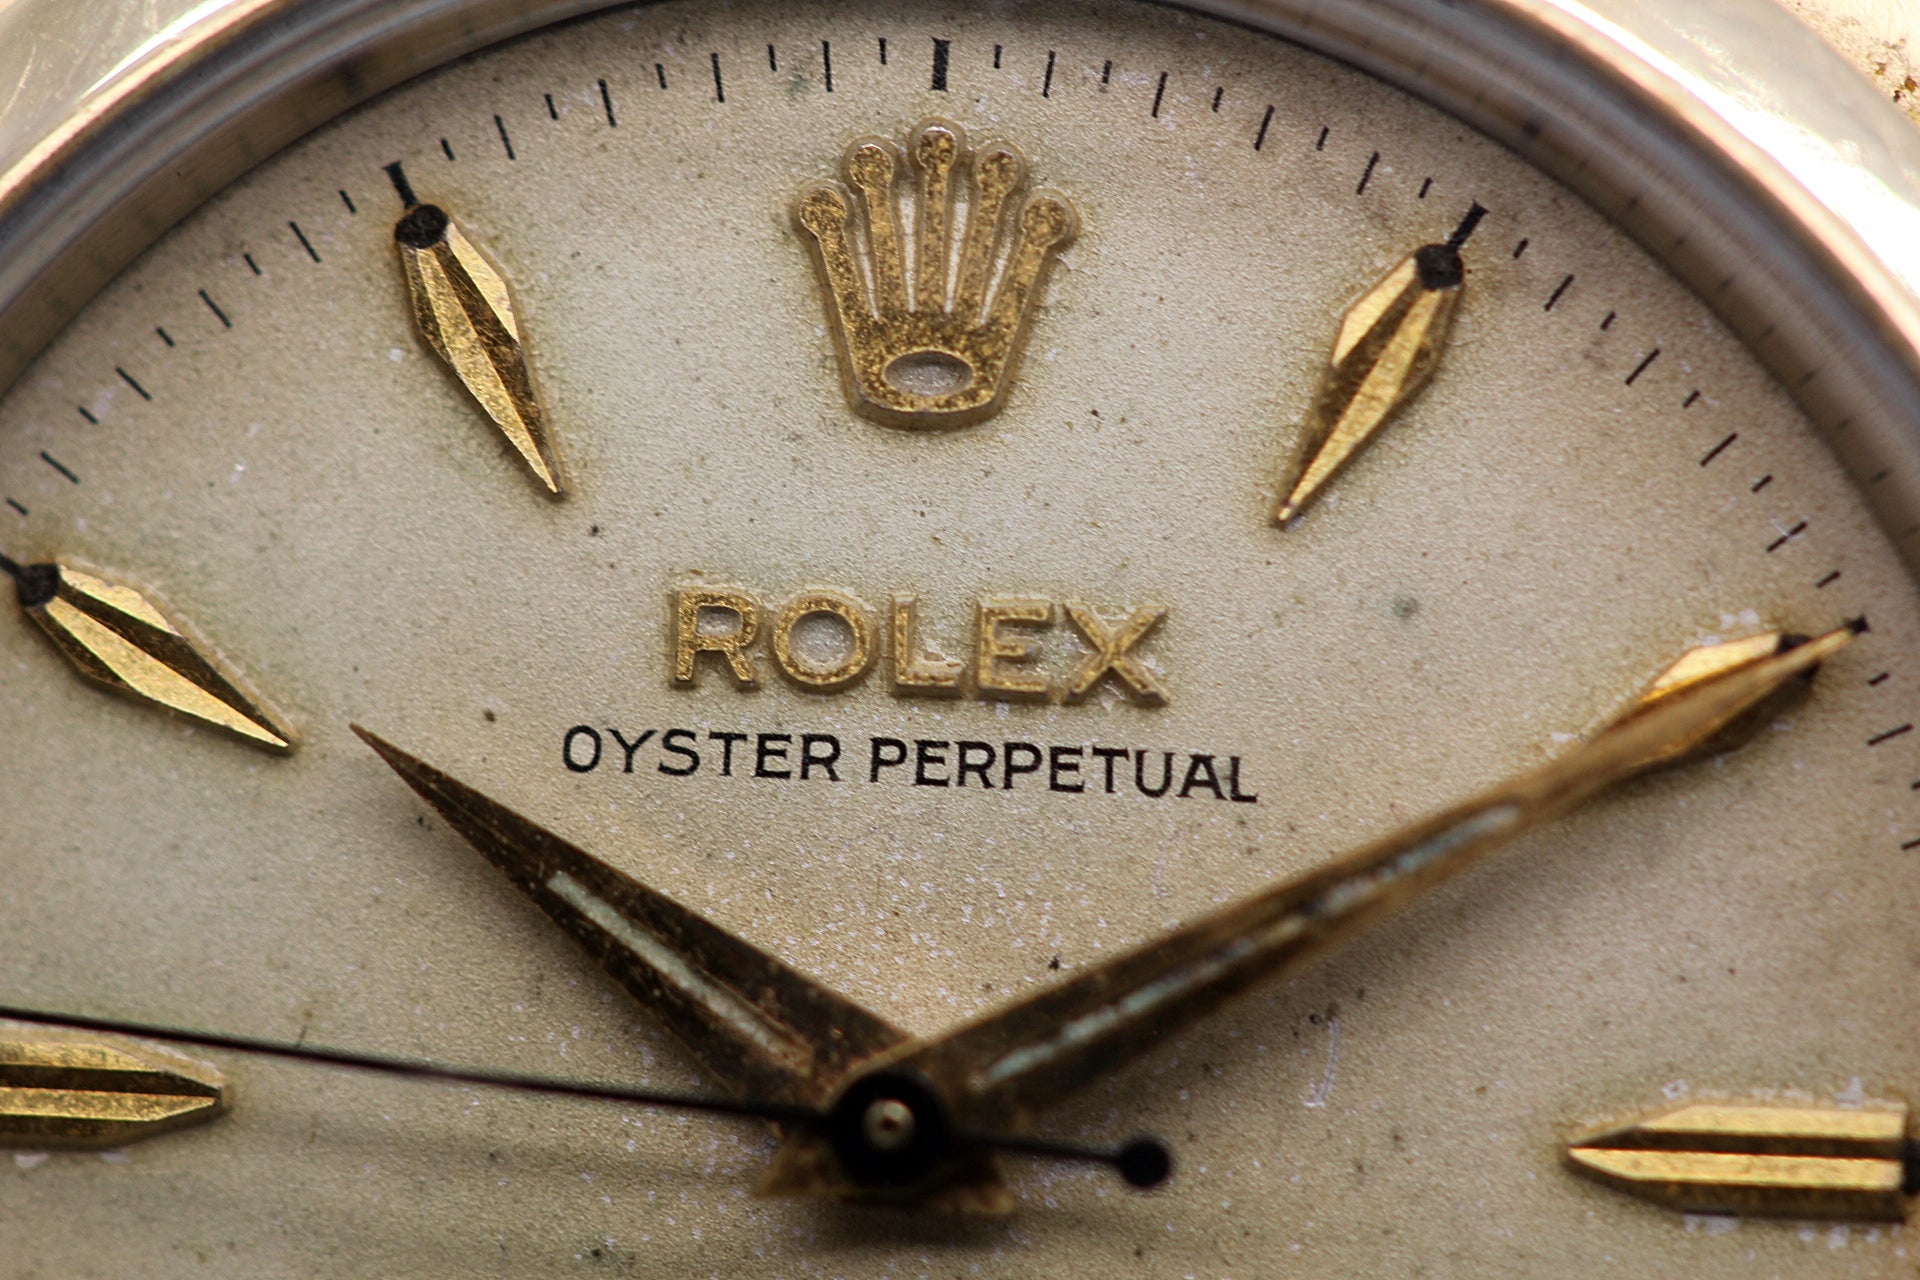 ROLEX<br> Oyster Perpetual Ref.6634 Officially certified chronometer 